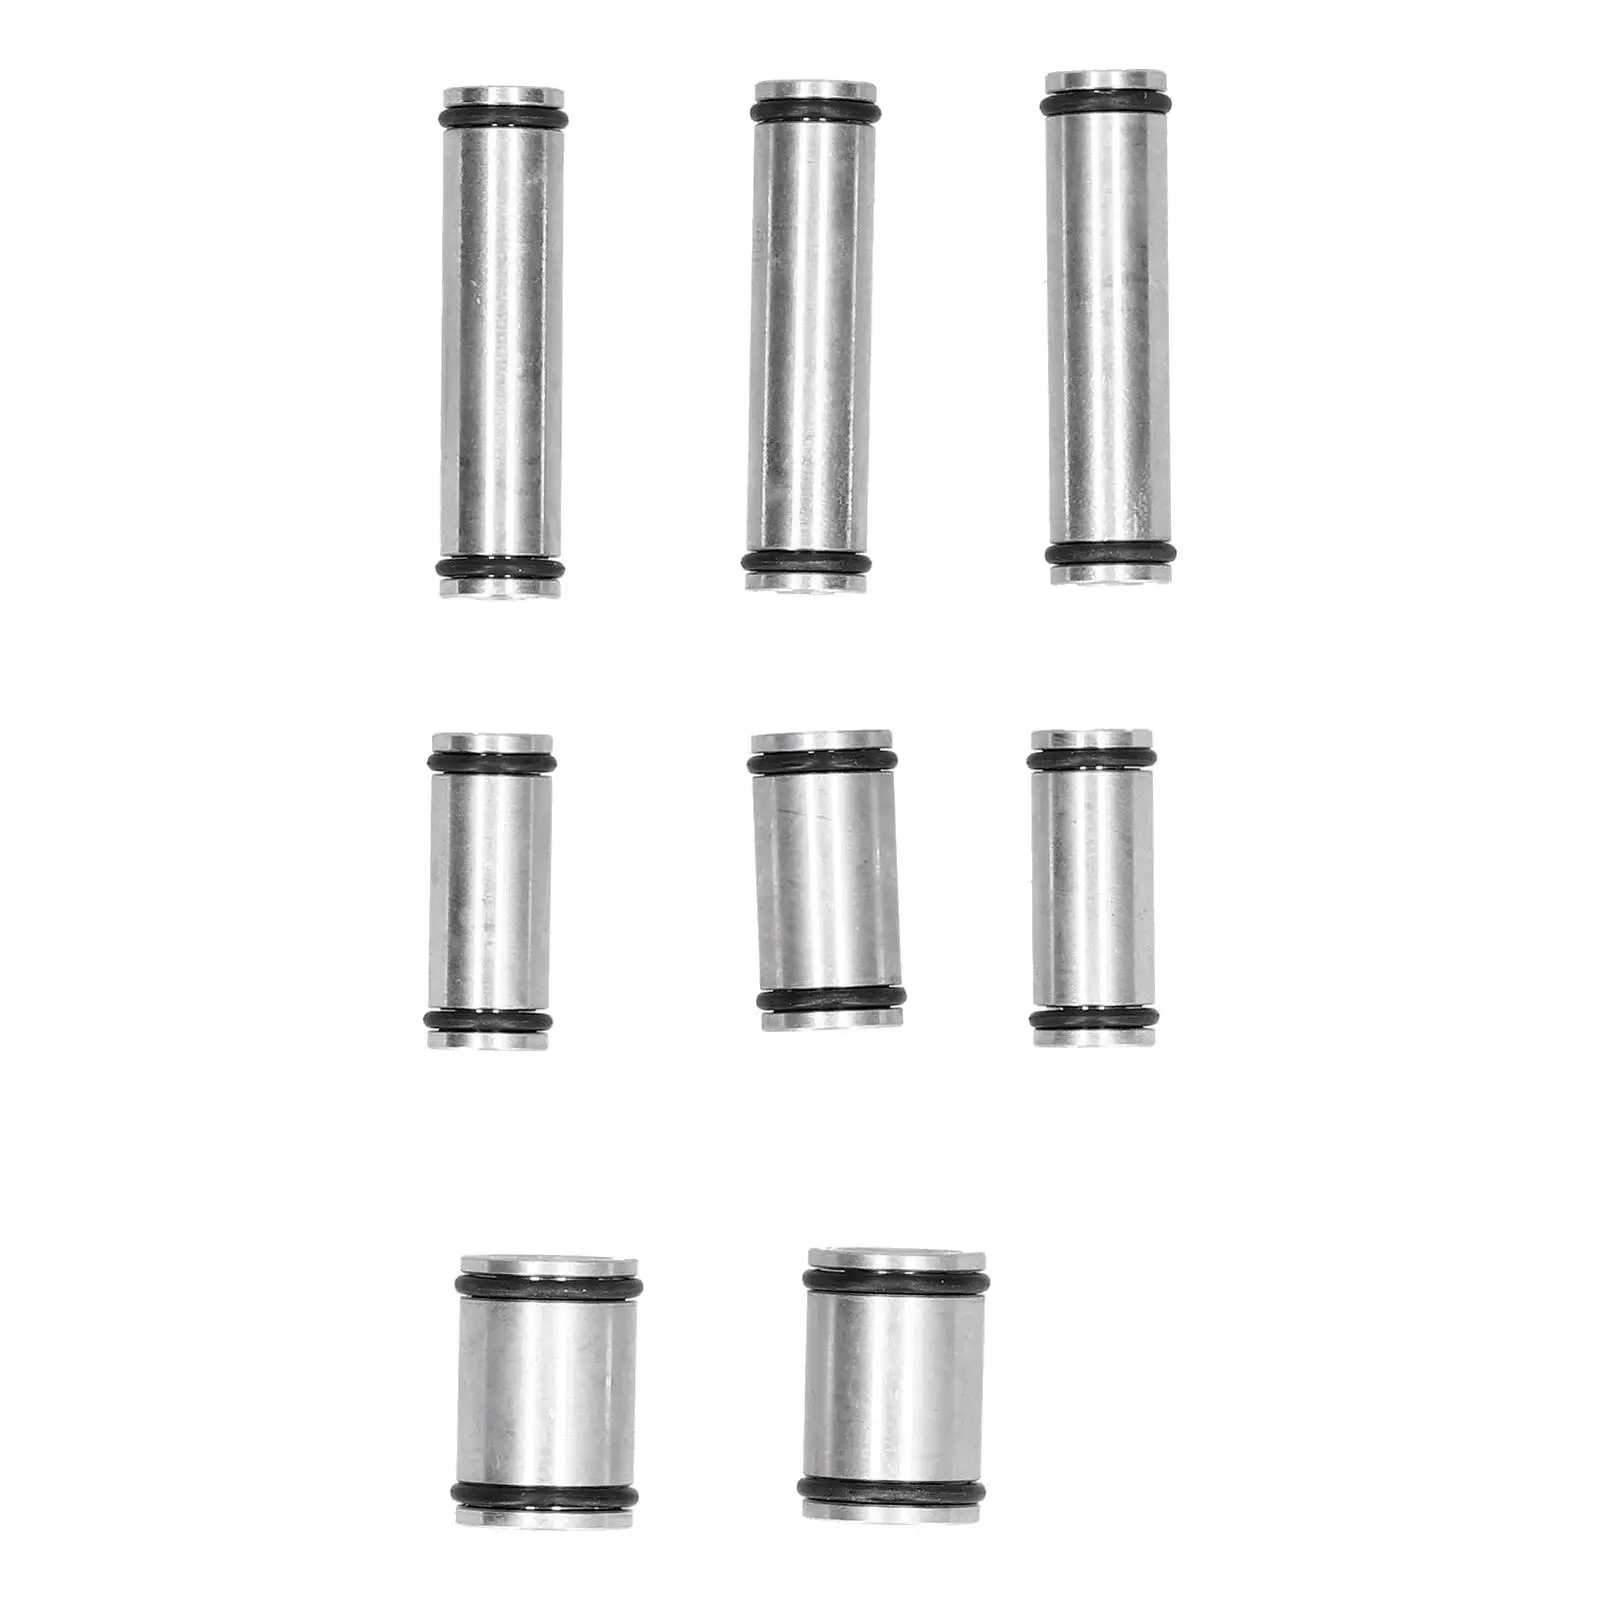 8Pcs 0BH321477 Oil Pipe Kit Replace Parts Auto Car Metal Dq500 0BH Fits for A3 